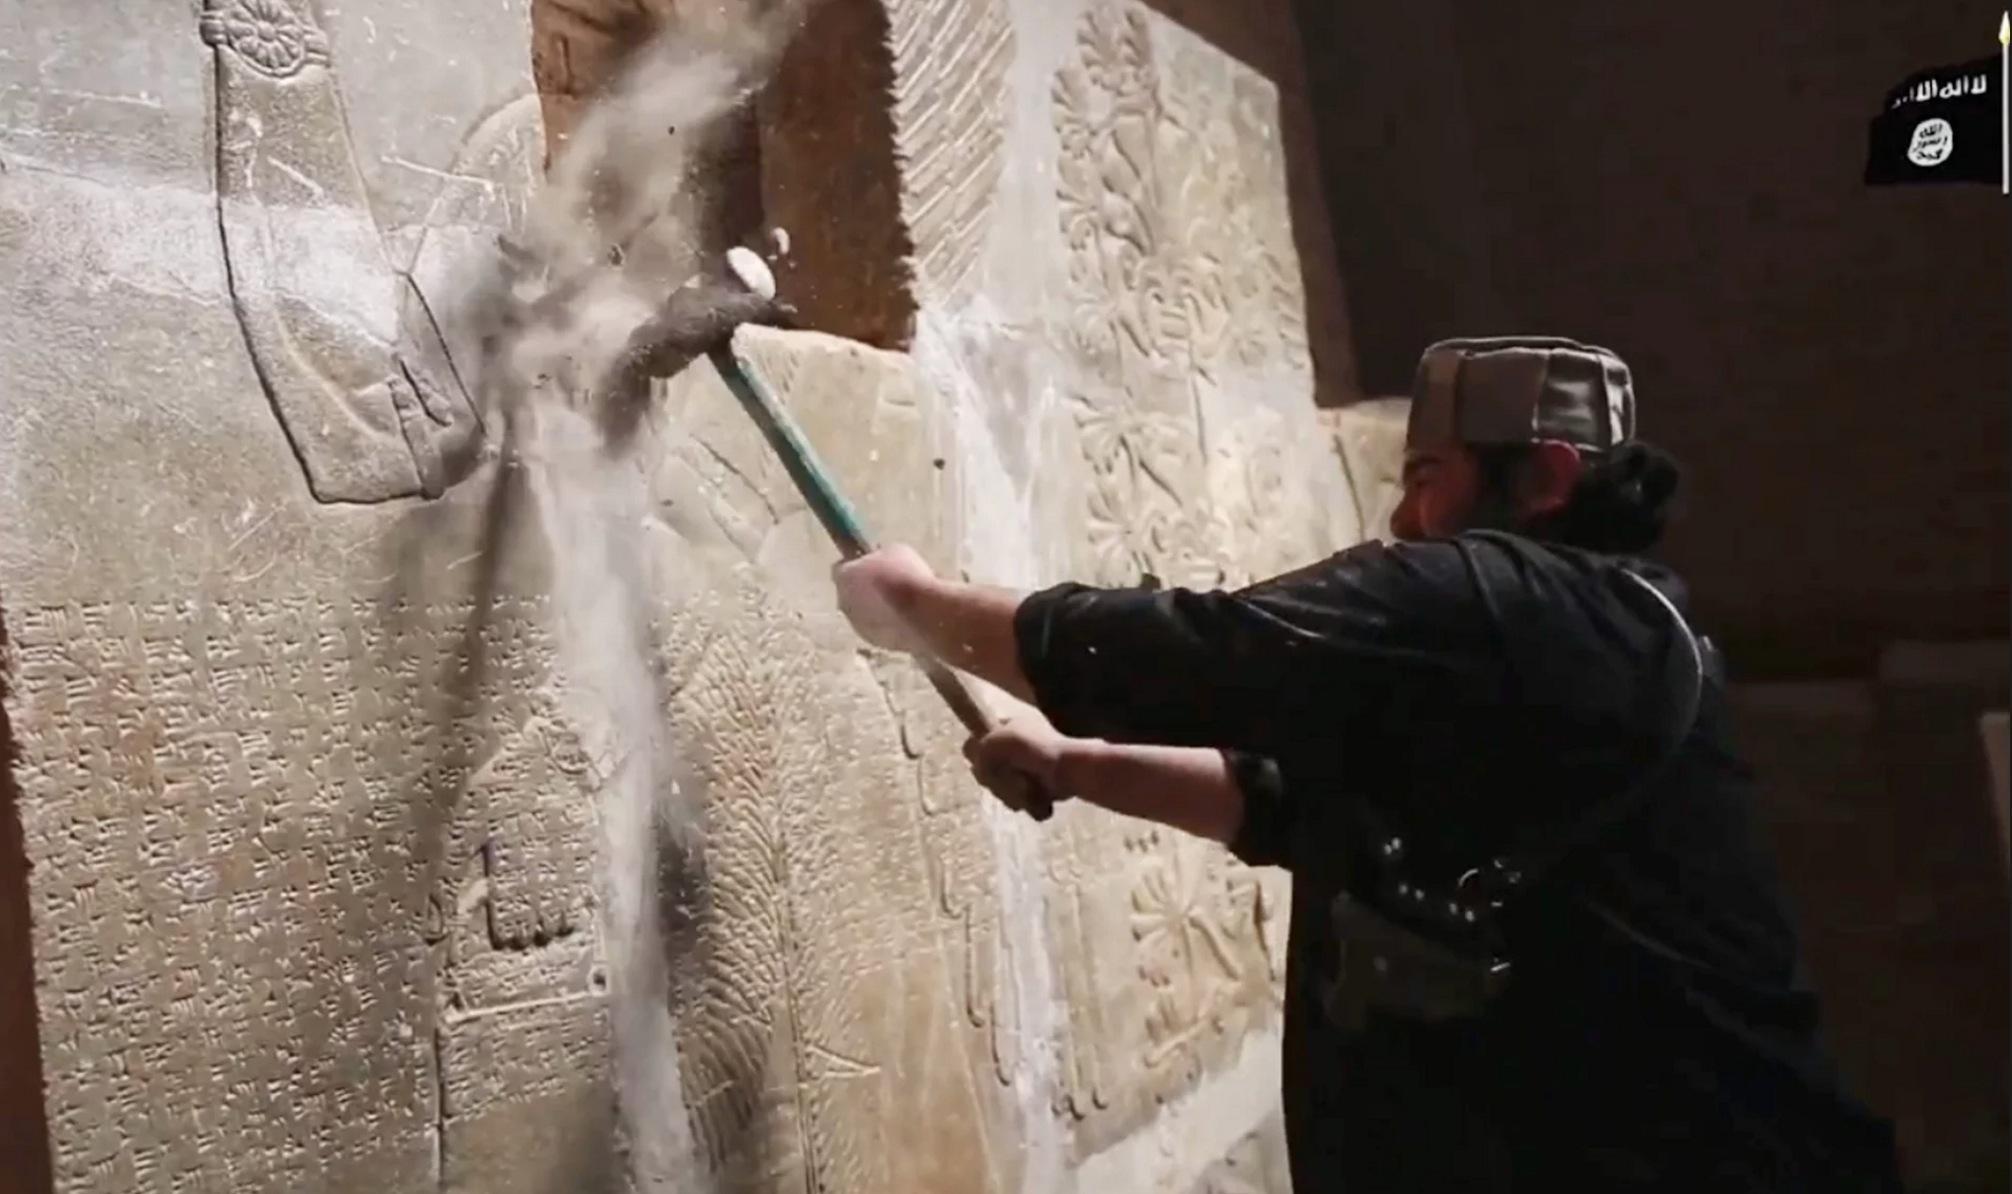 An Isis militant sets about destroying an ancient Assyrian frieze in Nimrud in 2015